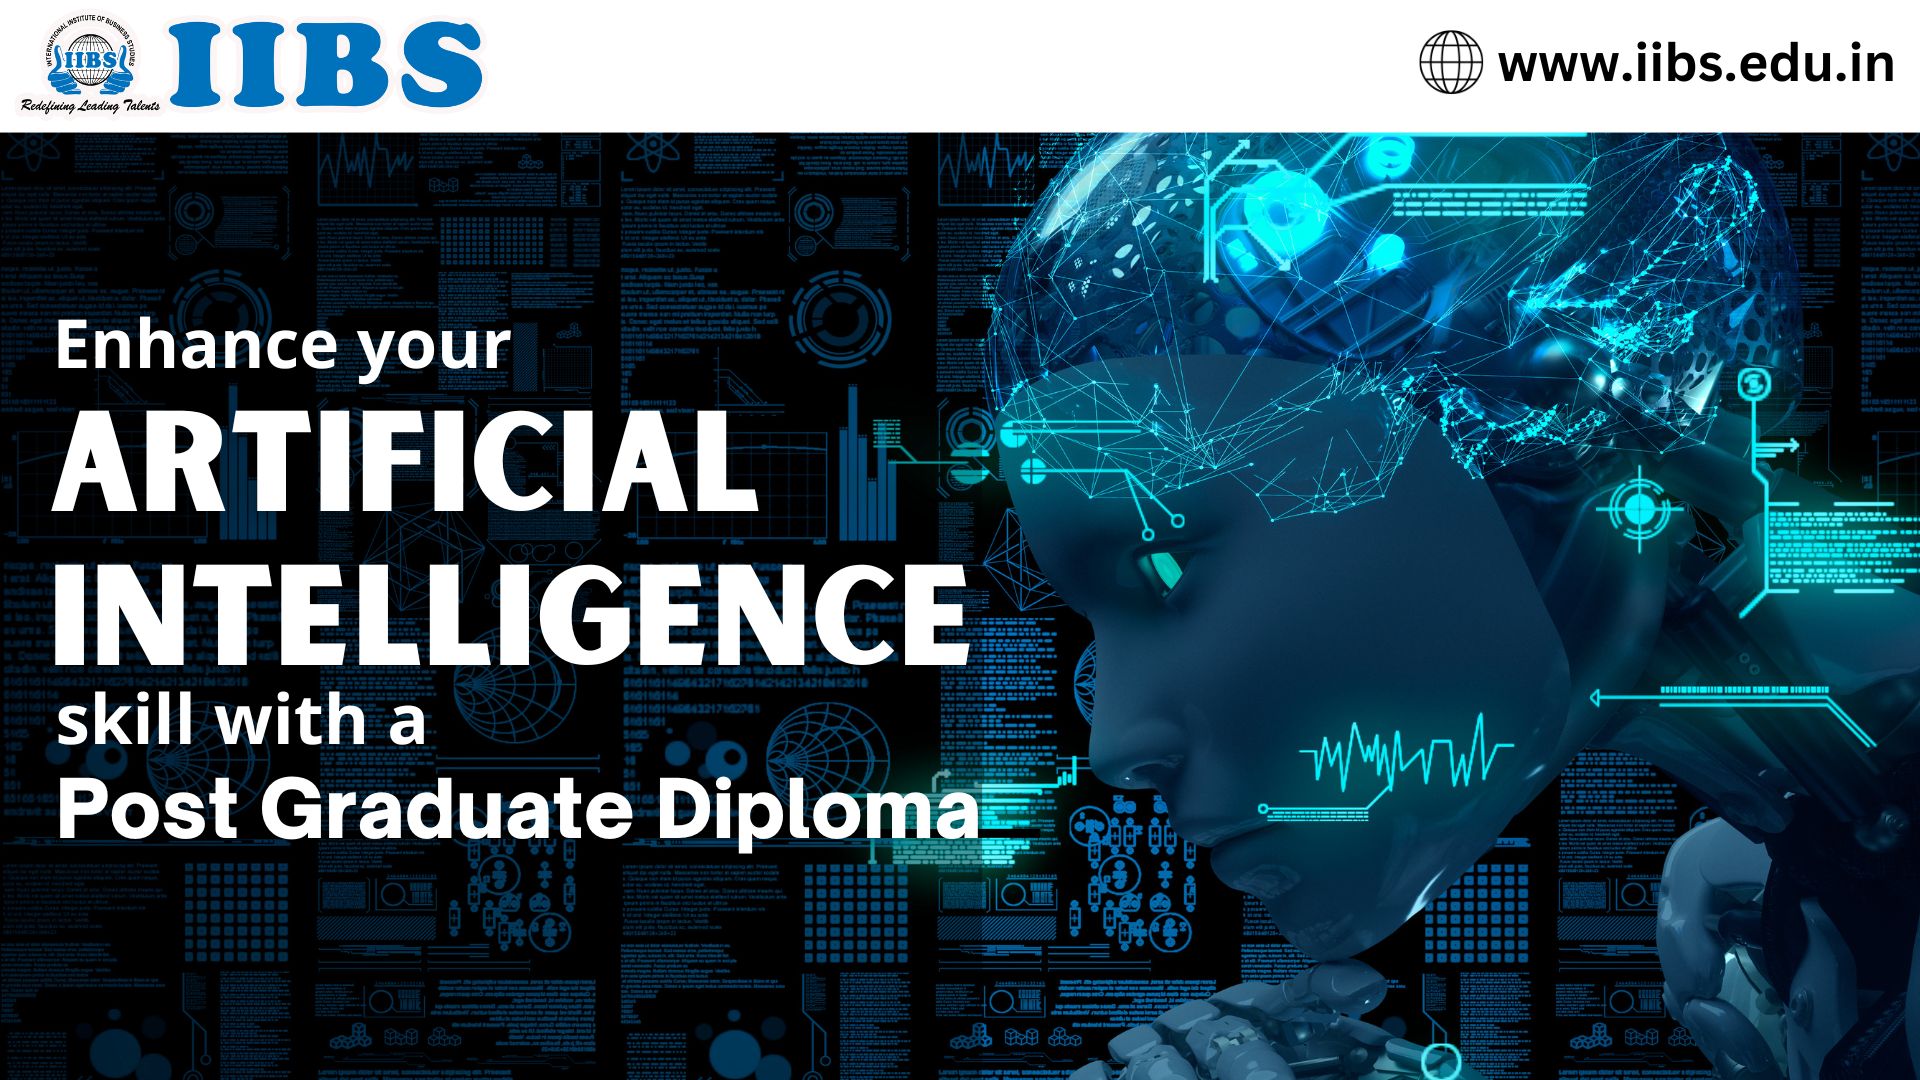 Enhance your Artificial Intelligence Skill with a Post Graduate Diploma